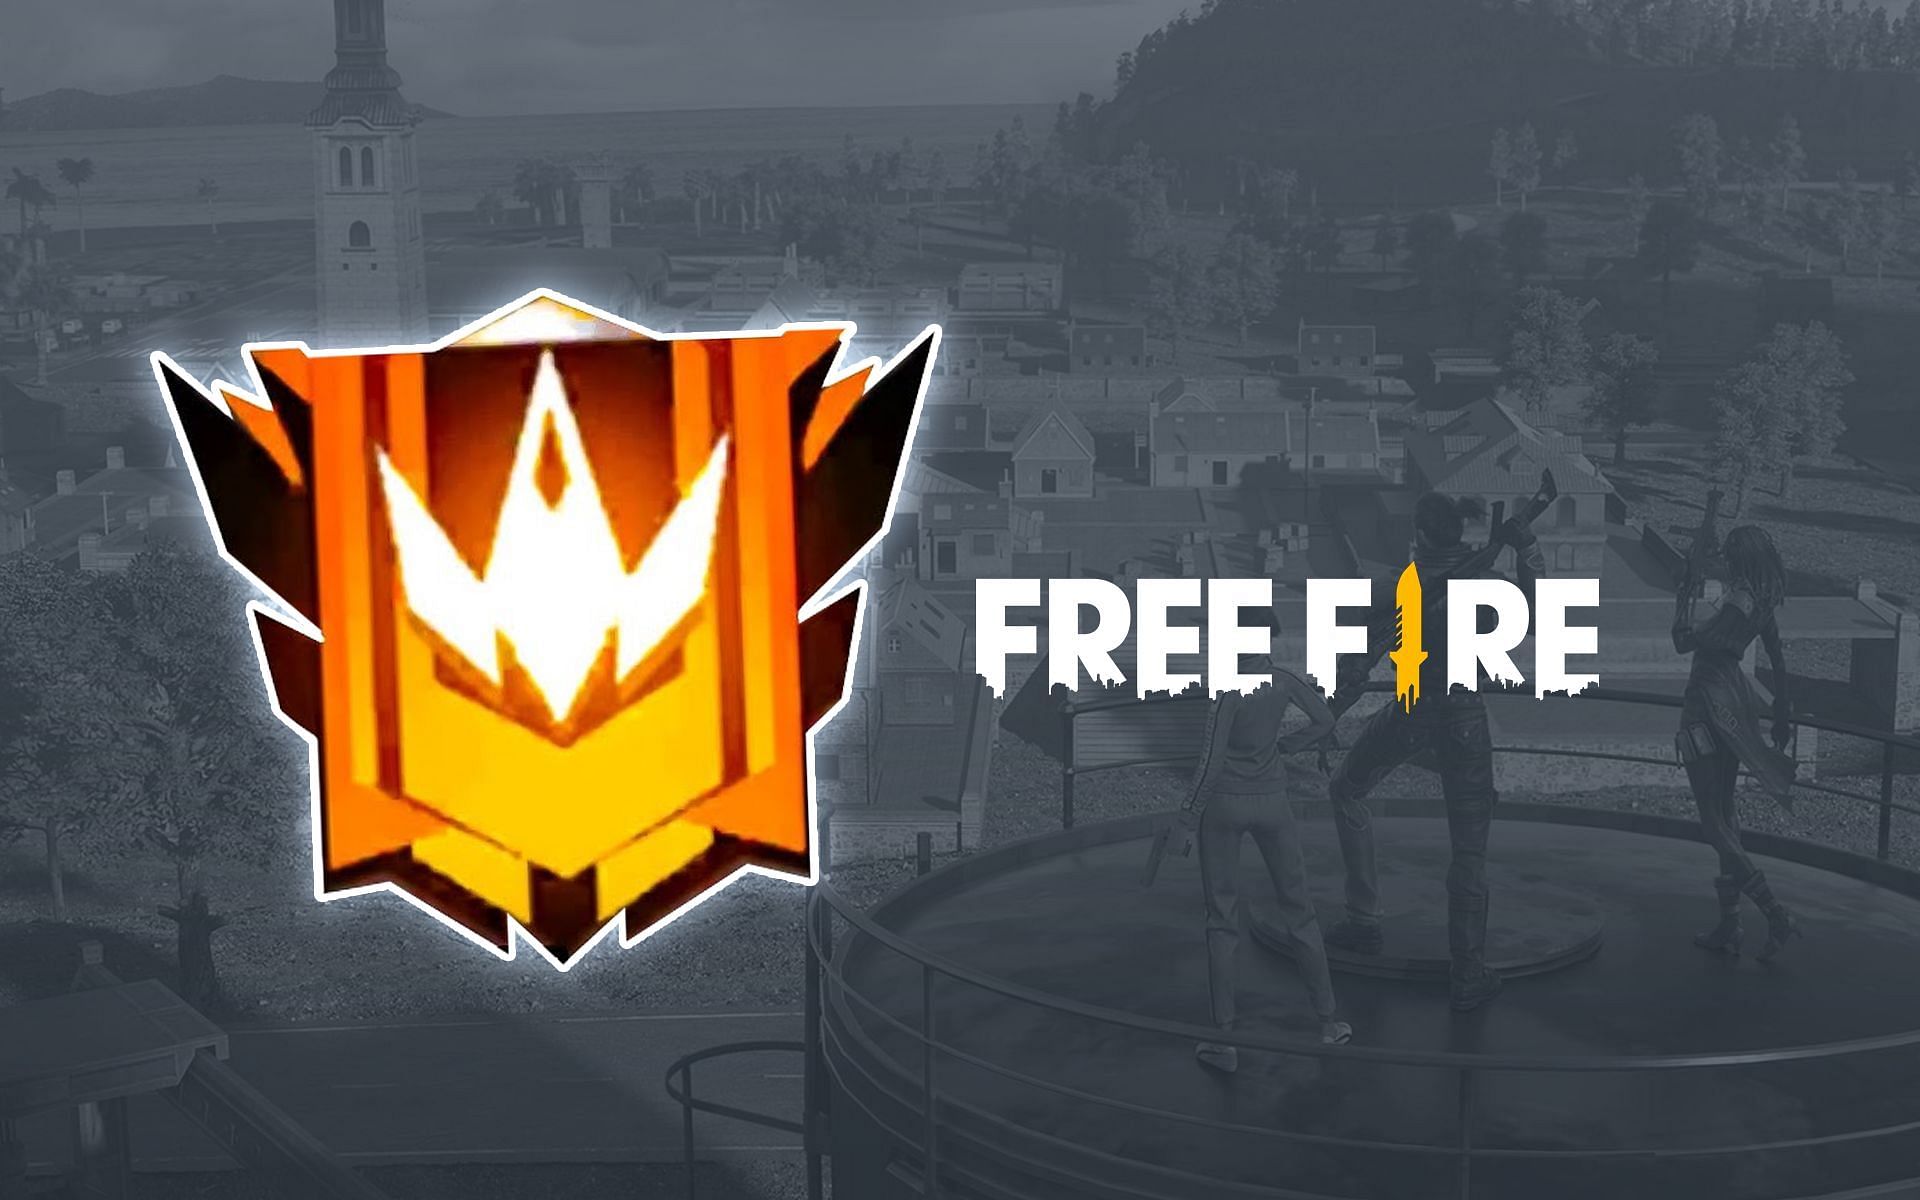 Master rank has been added to Free Fire